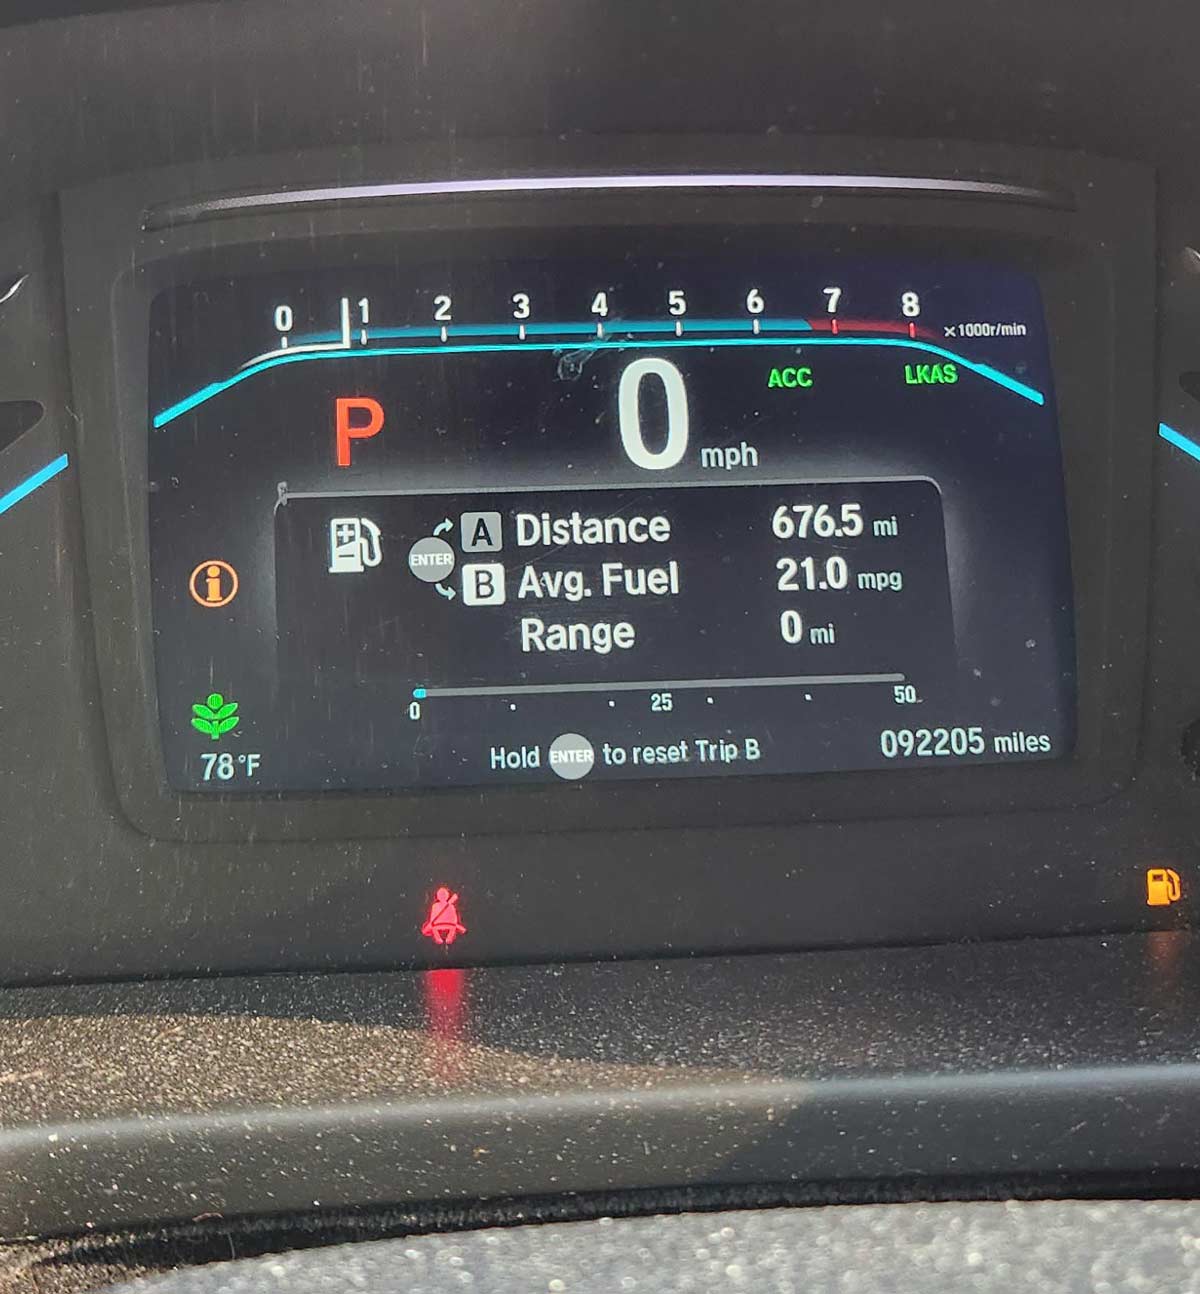 Wife says we need to get gas when we leave